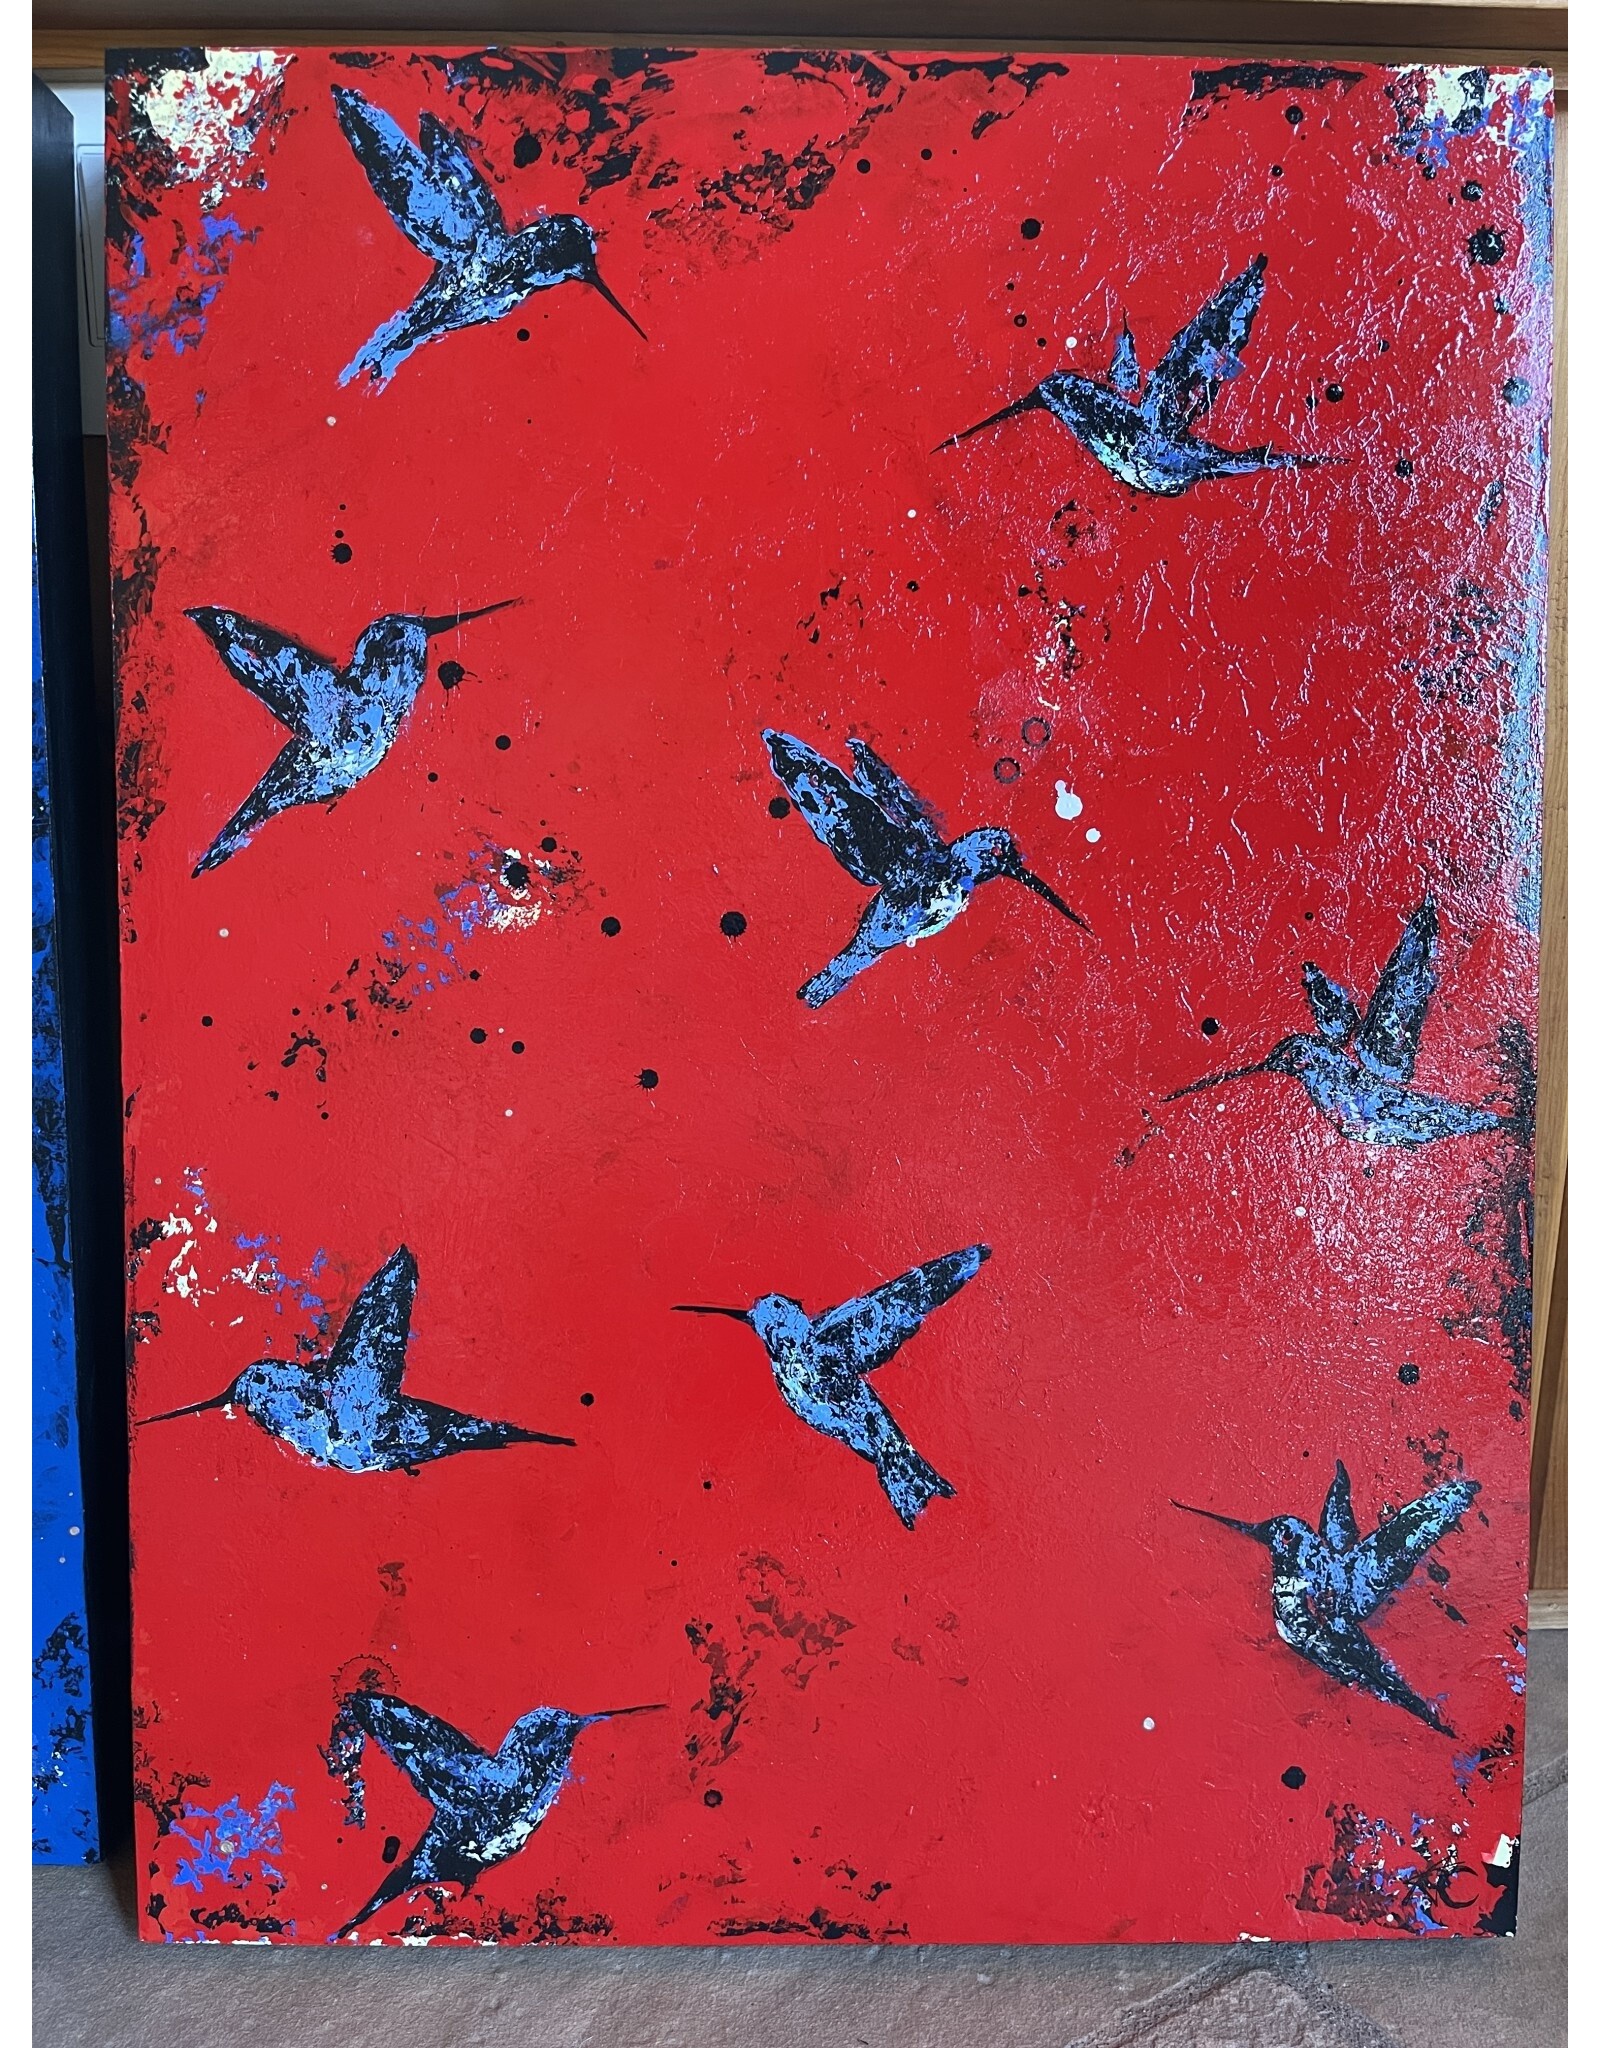 Annette Colby - Painter "Dancing in the Breeze" Hummingbirds on Red 18x24 Painting - AC